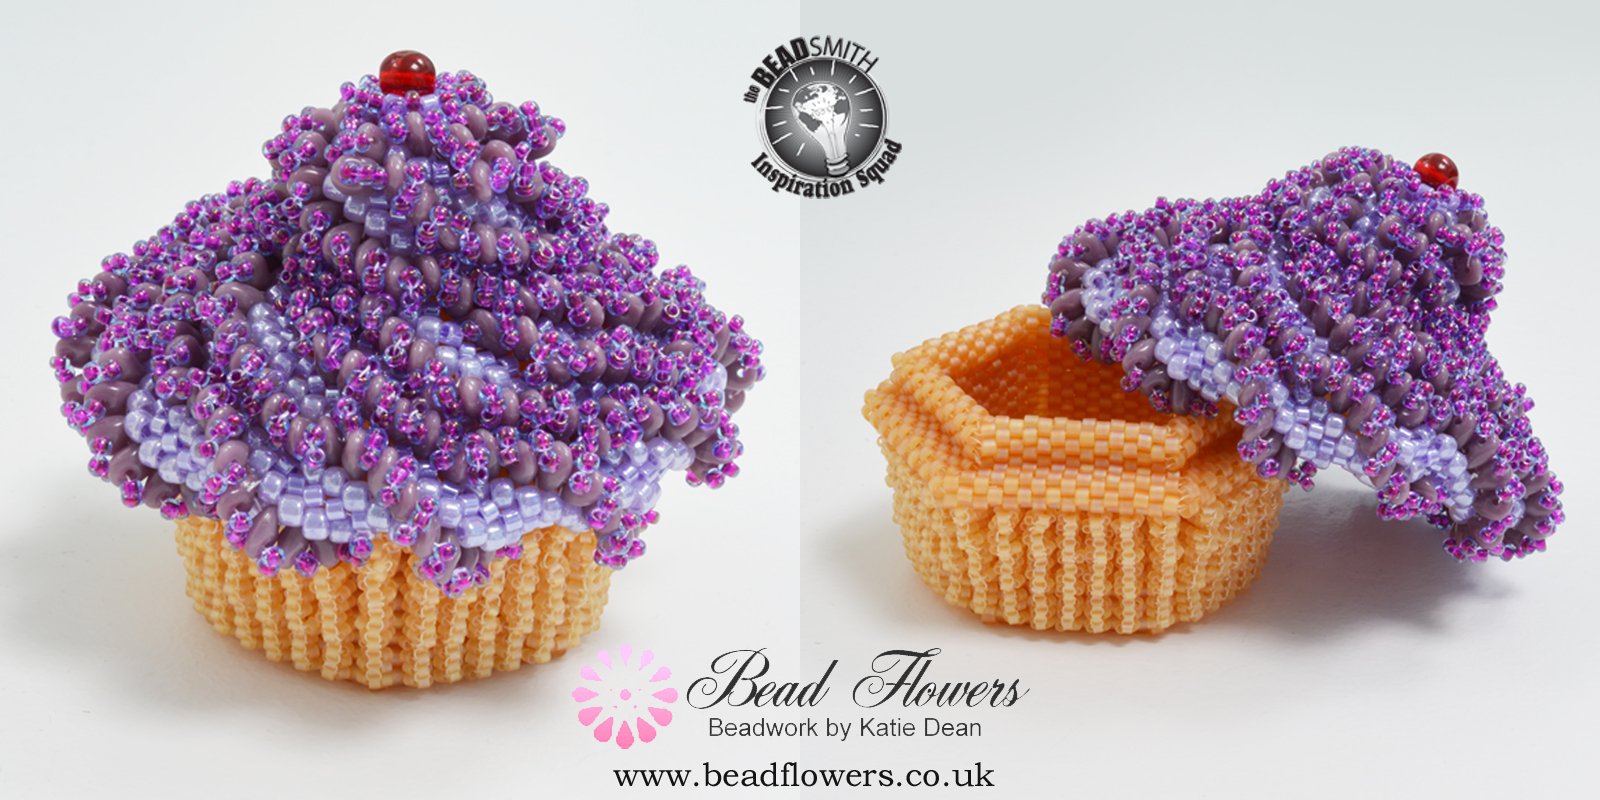 Cupcake Beaded Box pattern, Katie Dean, Beadflowers. Learn how to do Peyote stitch in the ditch technique, My World of Beads